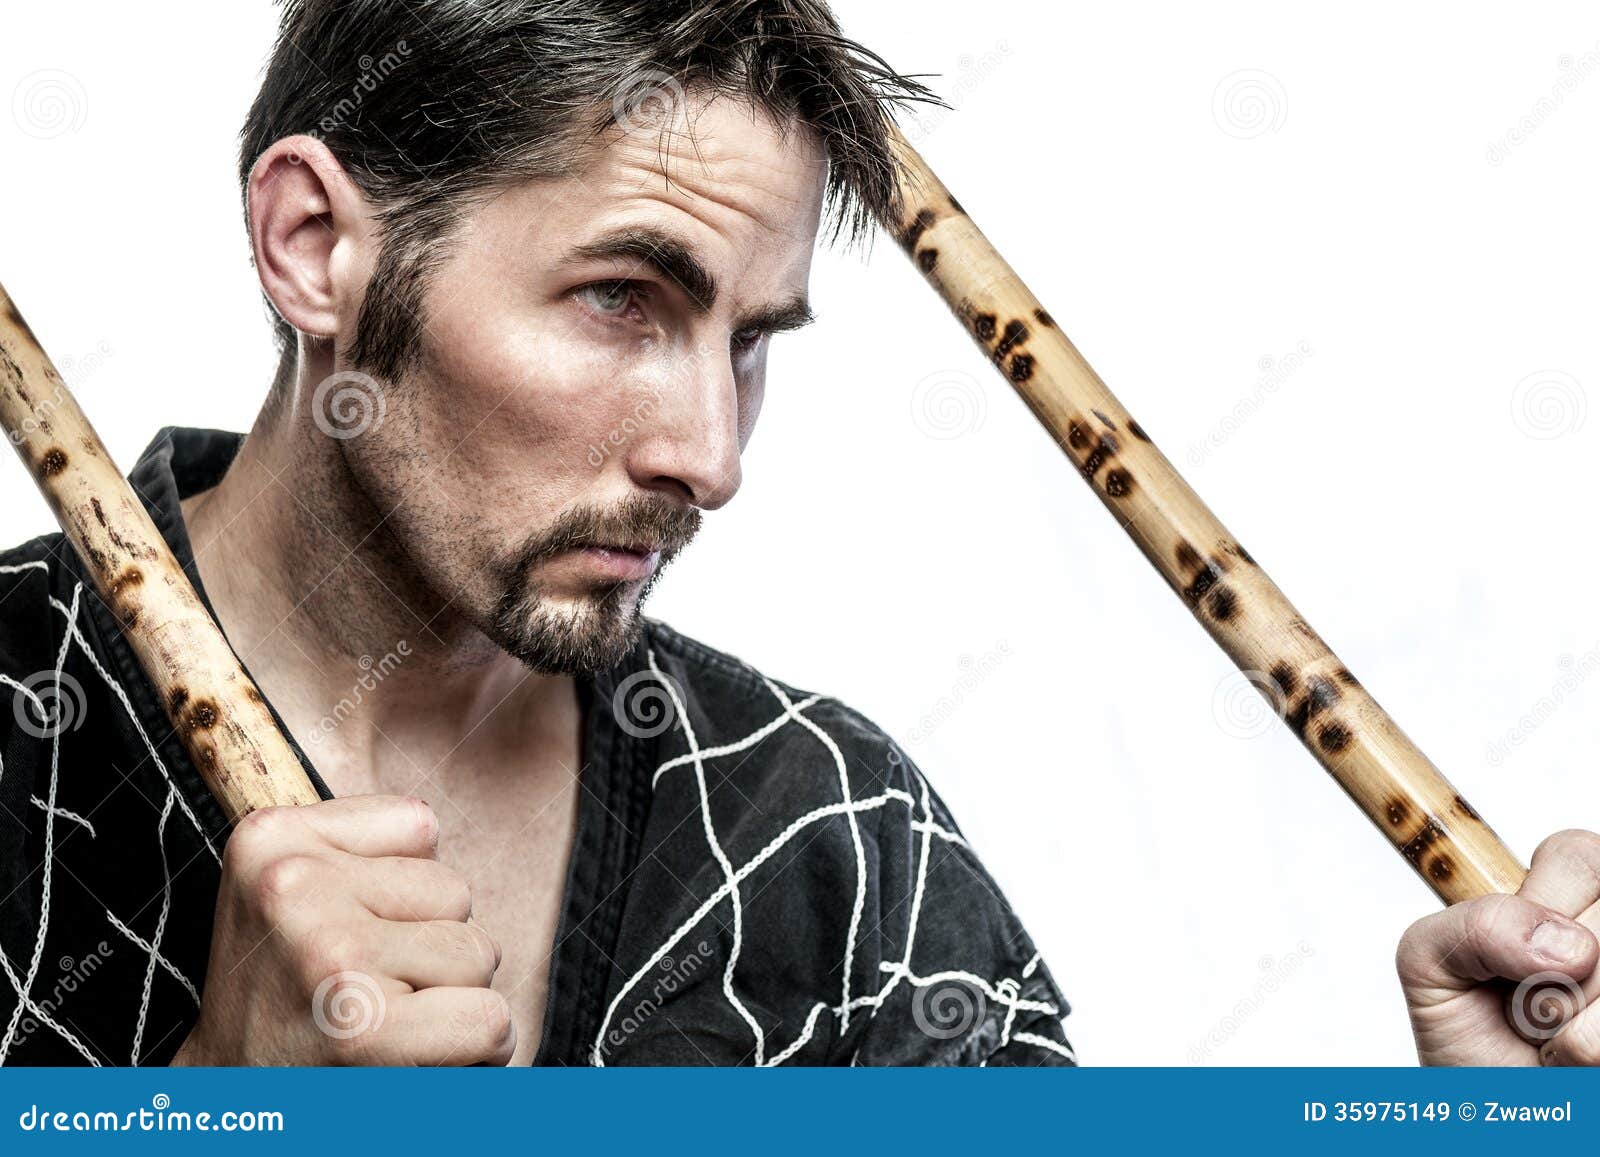 Martial arts master with bamboo sticks Royalty Free Stock Images - martial-arts-master-bamboo-sticks-black-combat-dress-two-short-isolated-white-background-35975149